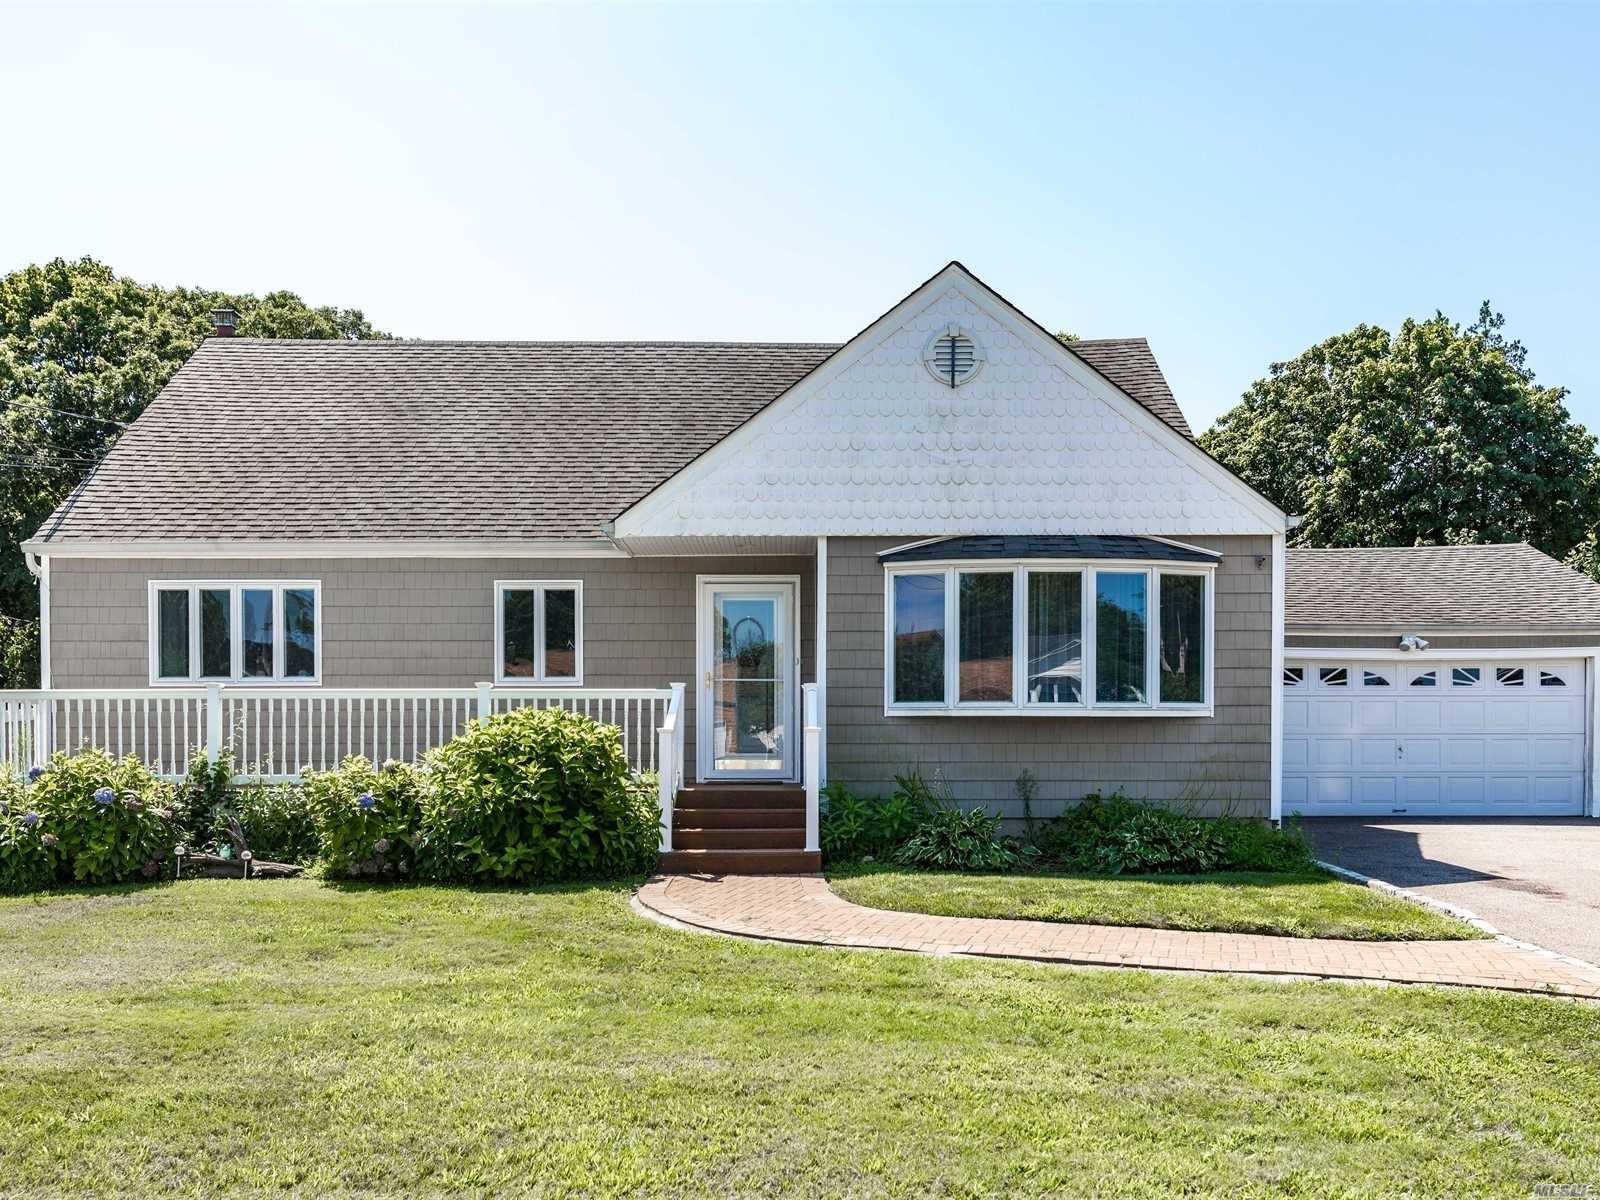 Exp Cape In East Islip School District With Large Rear Yard & Many Updates In House. Home Features IGS, Vinyl Fencing, 200 Amp Service, 2 C Garage, Full Bsmt. Home Is Easy To View. Great Curb Appeal!